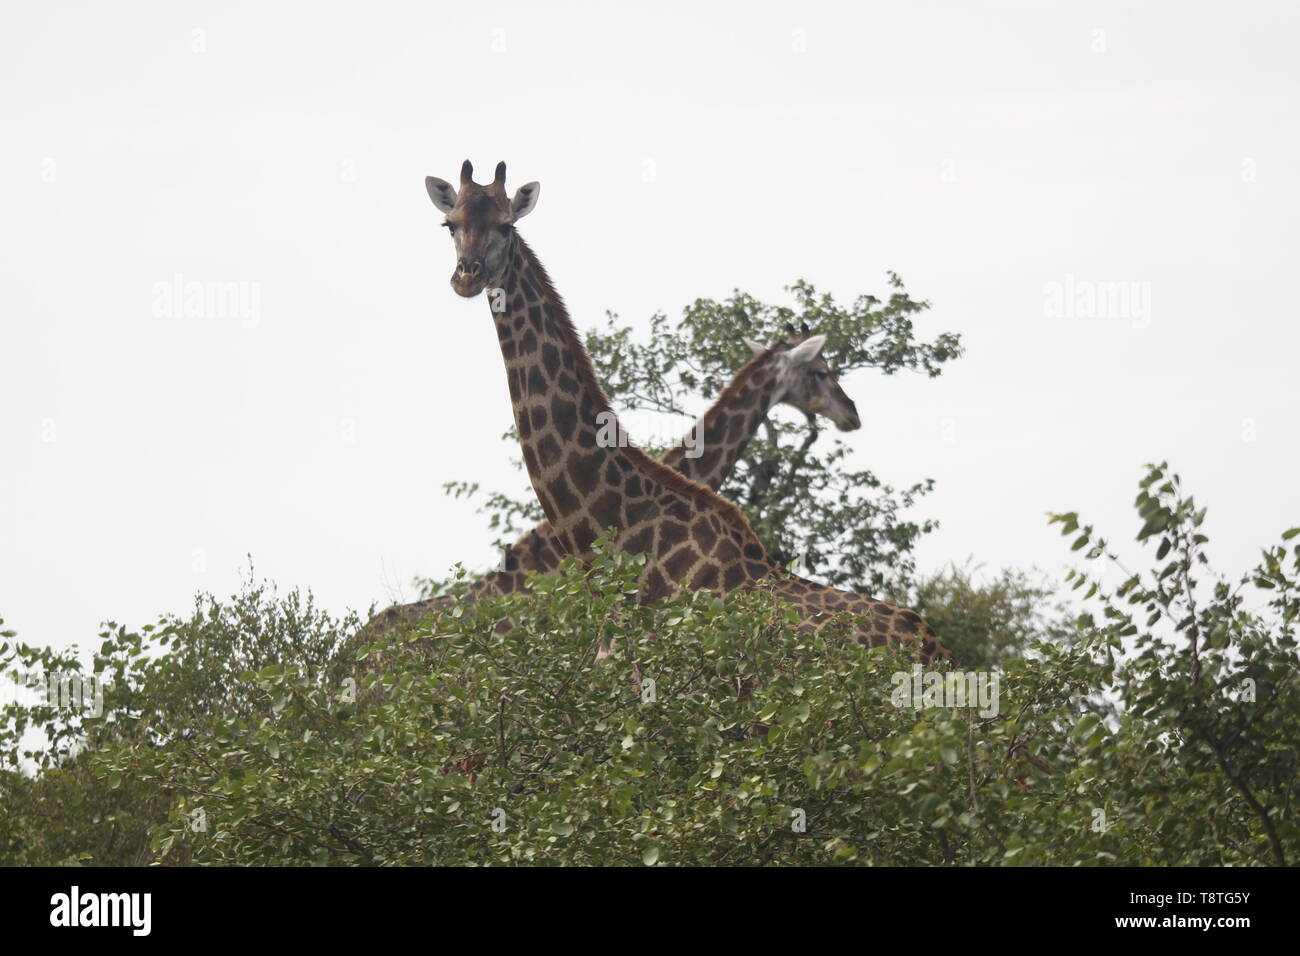 pair of Giraffe with crossed necks standing tall above the trees Stock Photo